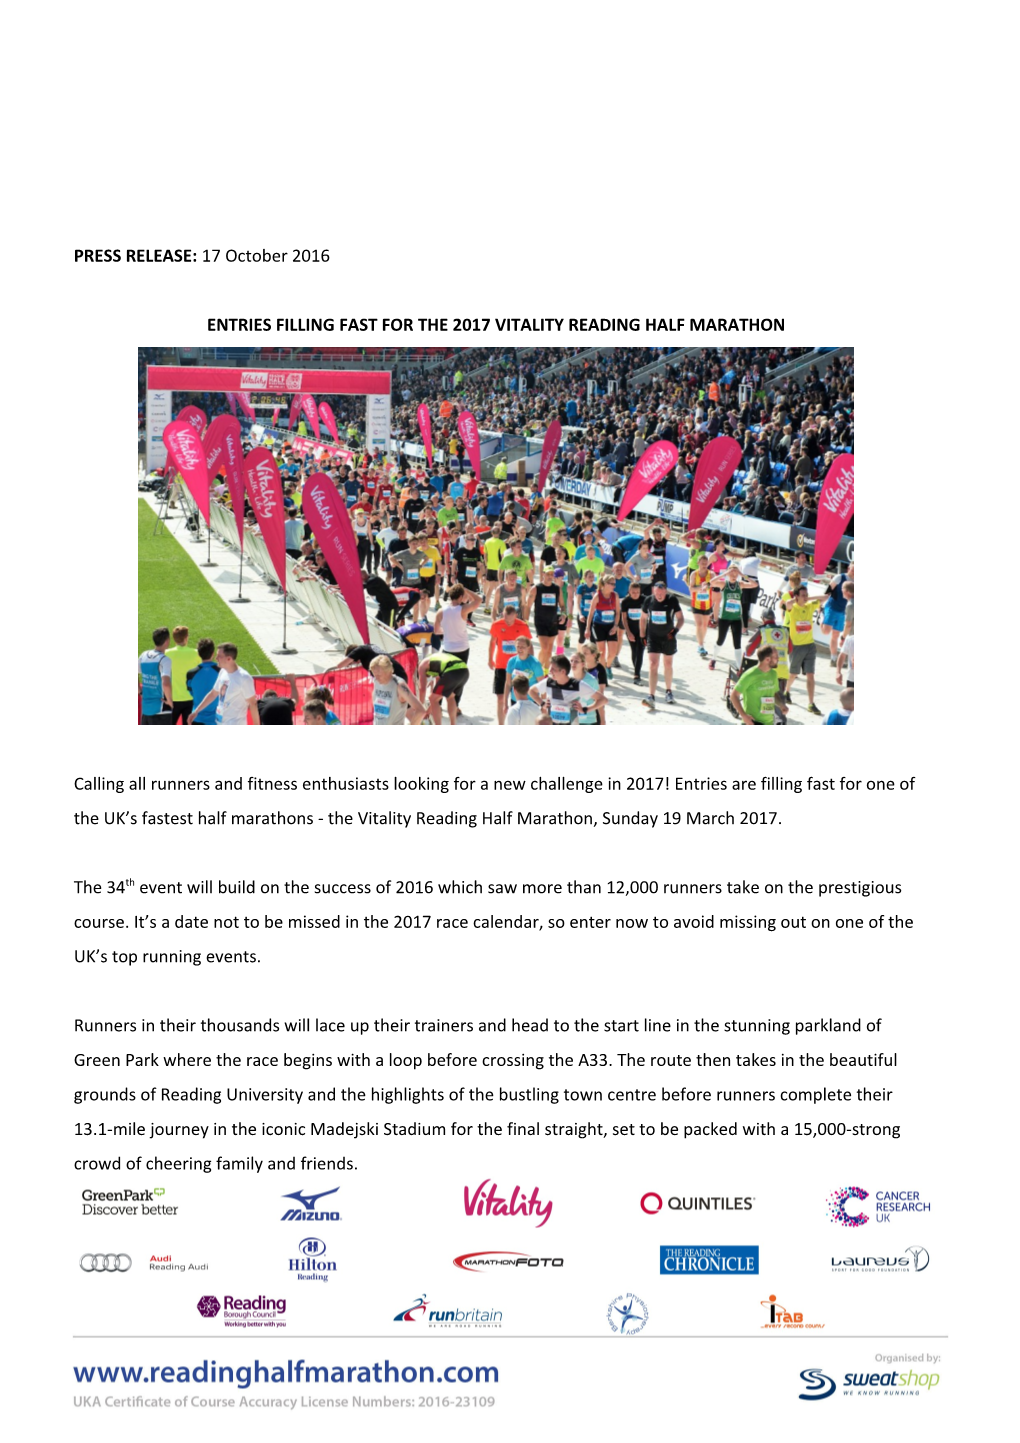 Entries Filling Fast for the 2017 Vitality Reading Half Marathon